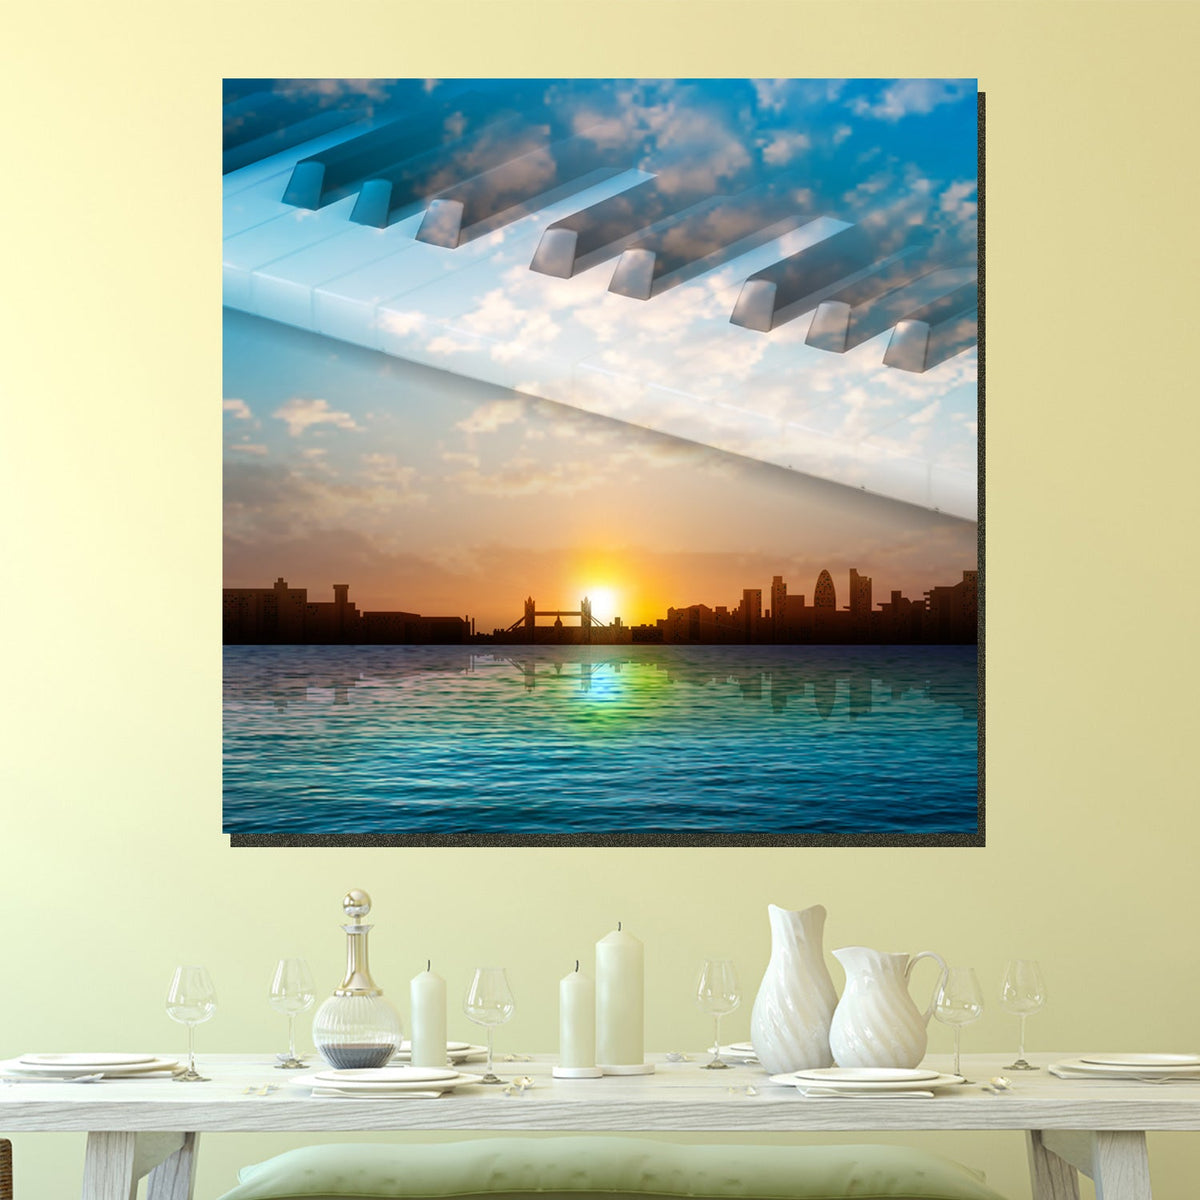 https://cdn.shopify.com/s/files/1/0387/9986/8044/products/LondonSkylinePianoCanvasArtprintStretched-2.jpg